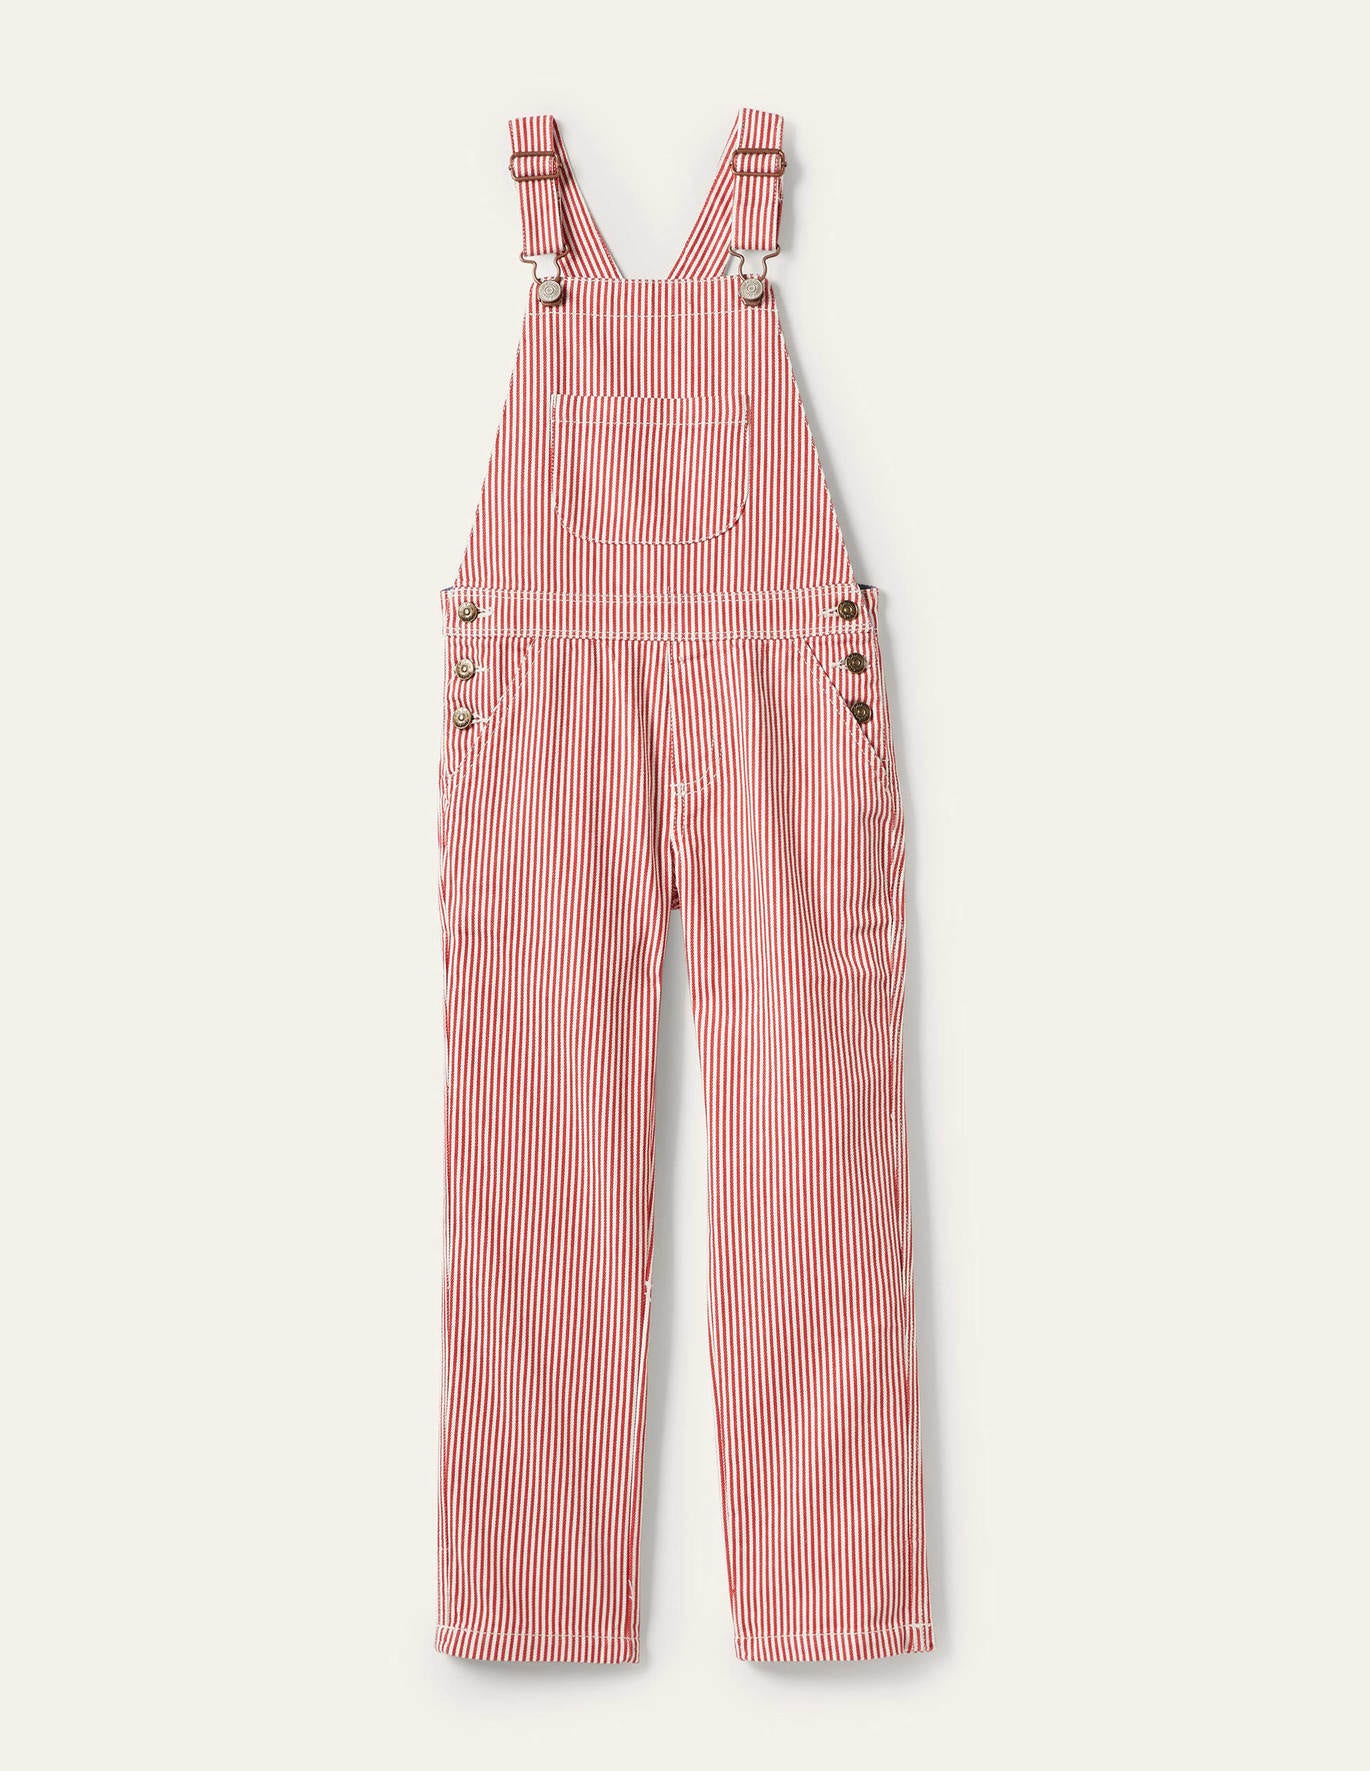 Boden Striped Overalls - Strawberry Tart Red Ticking